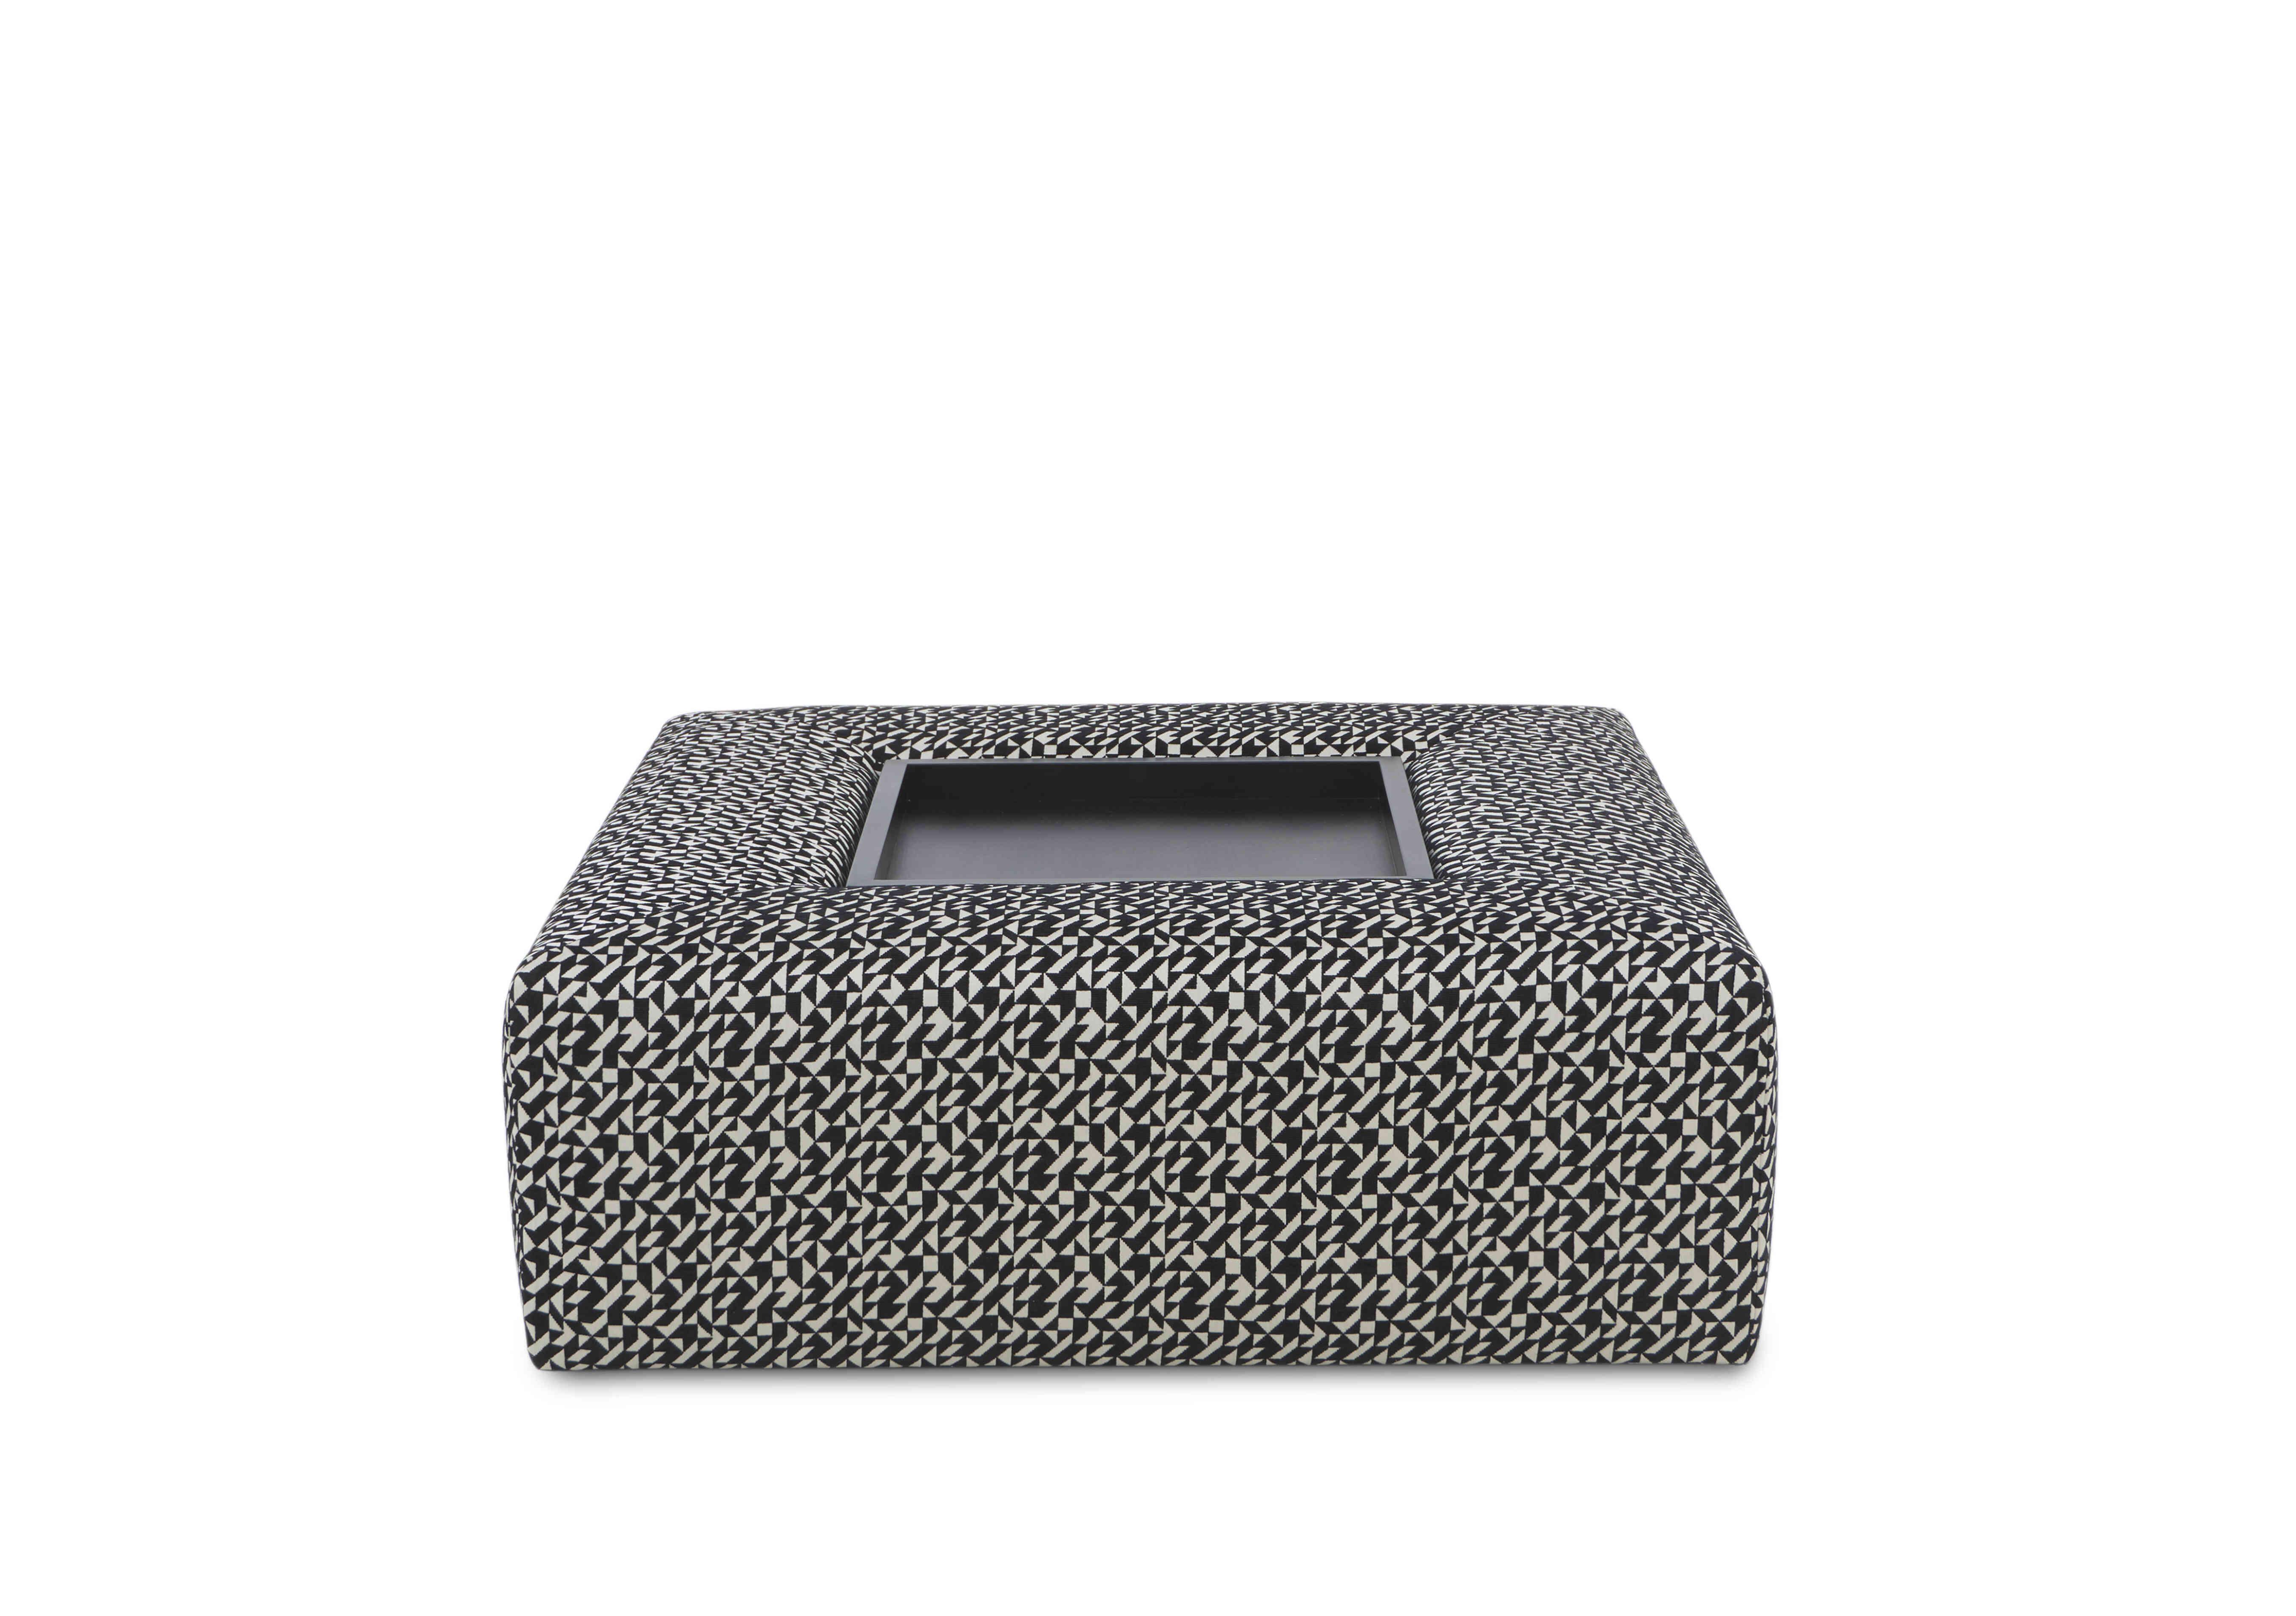 Celine Square Footstool with Wooden Tray in Tangram Monochrome Eb Sp on Furniture Village